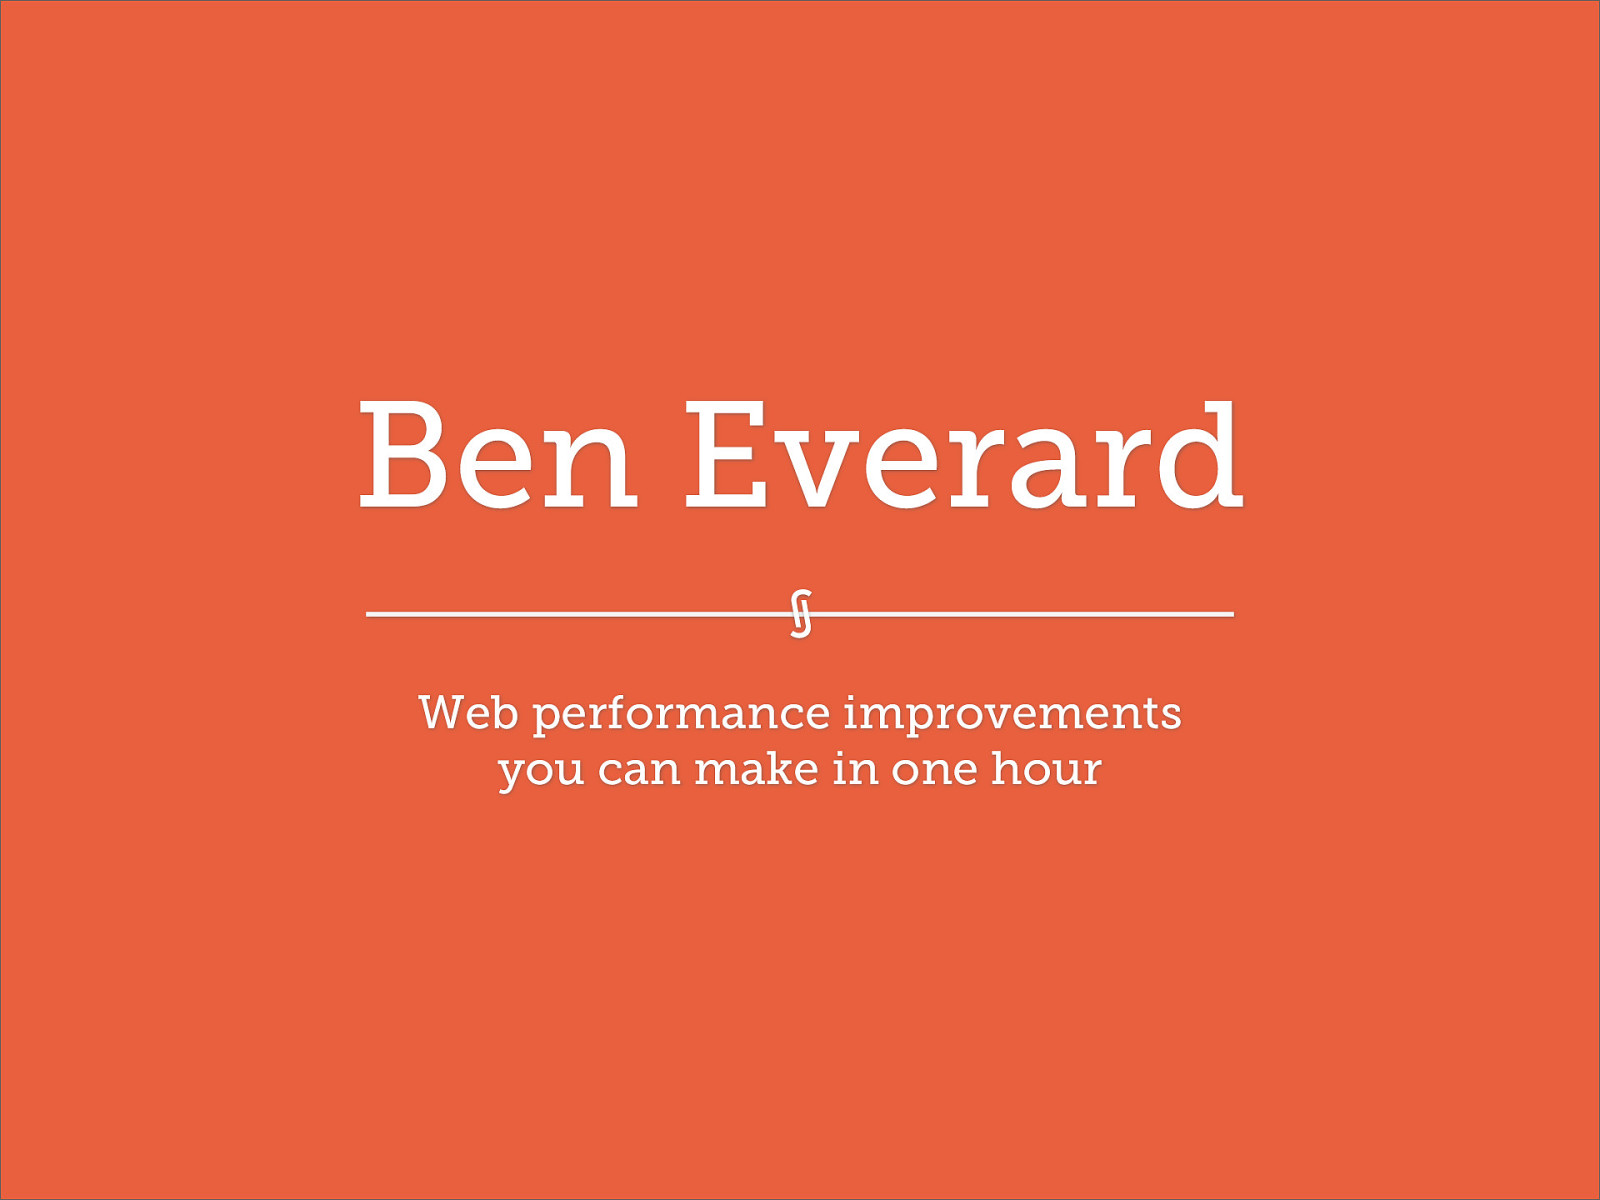 Web Performance Improvements In One Hour